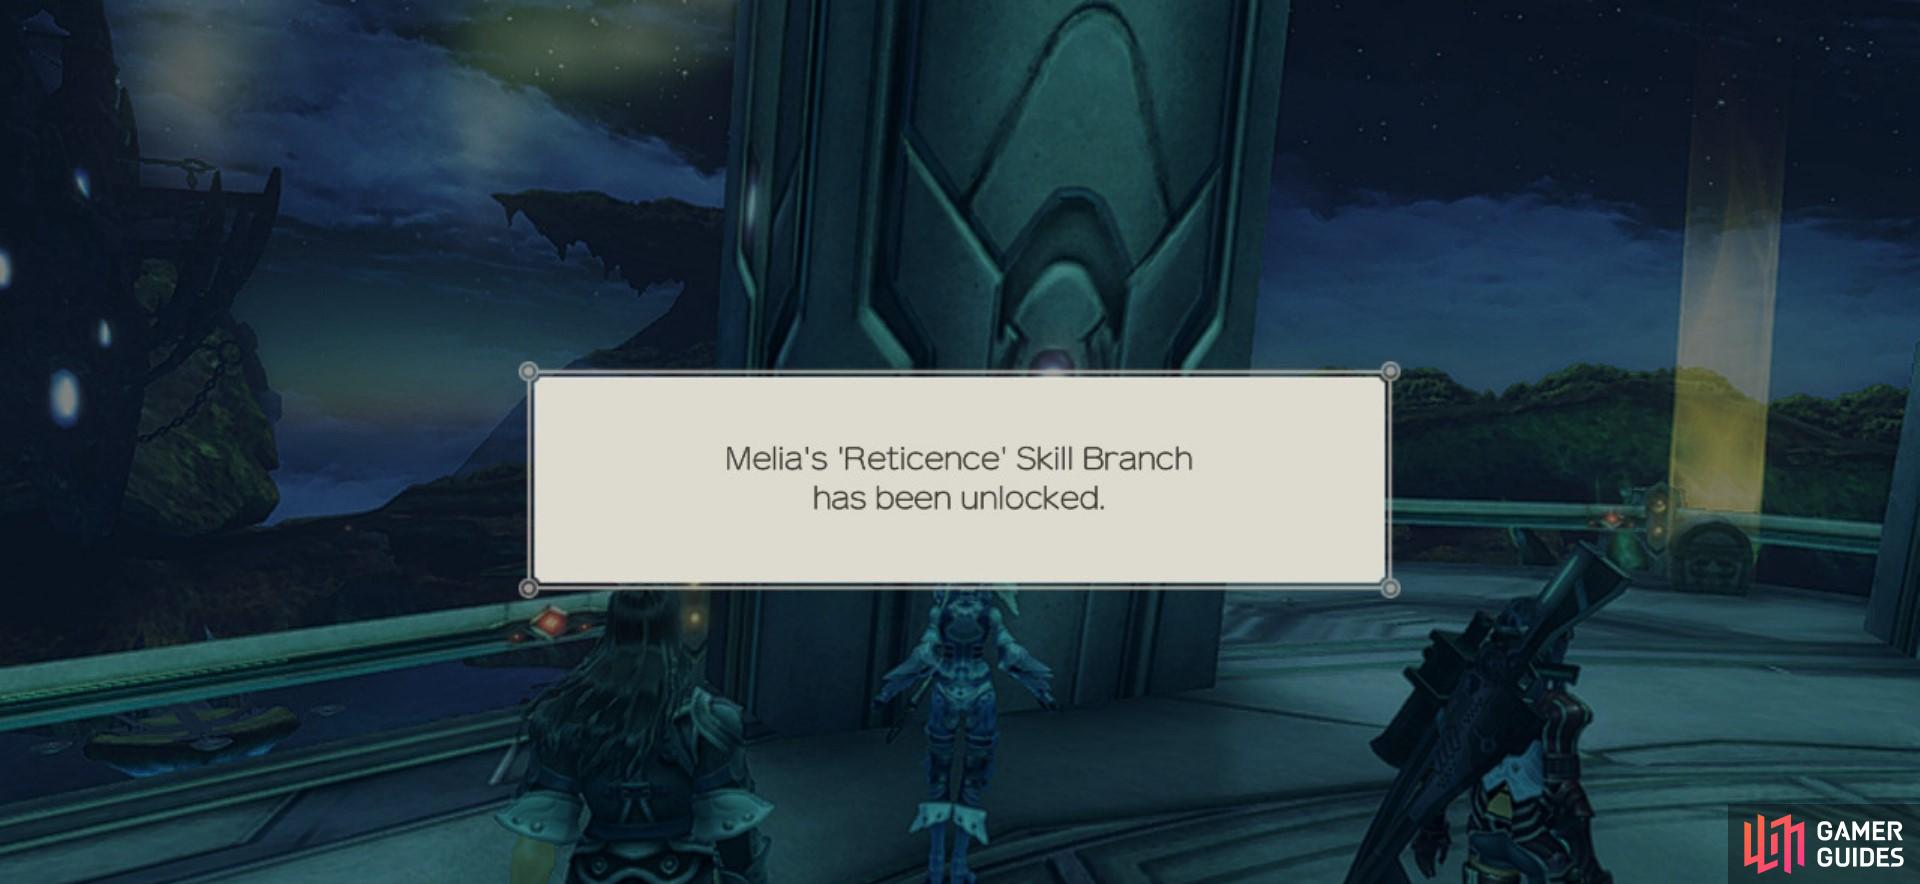 Completing this quest will unlock Melia’s skill branch, Reticence. 